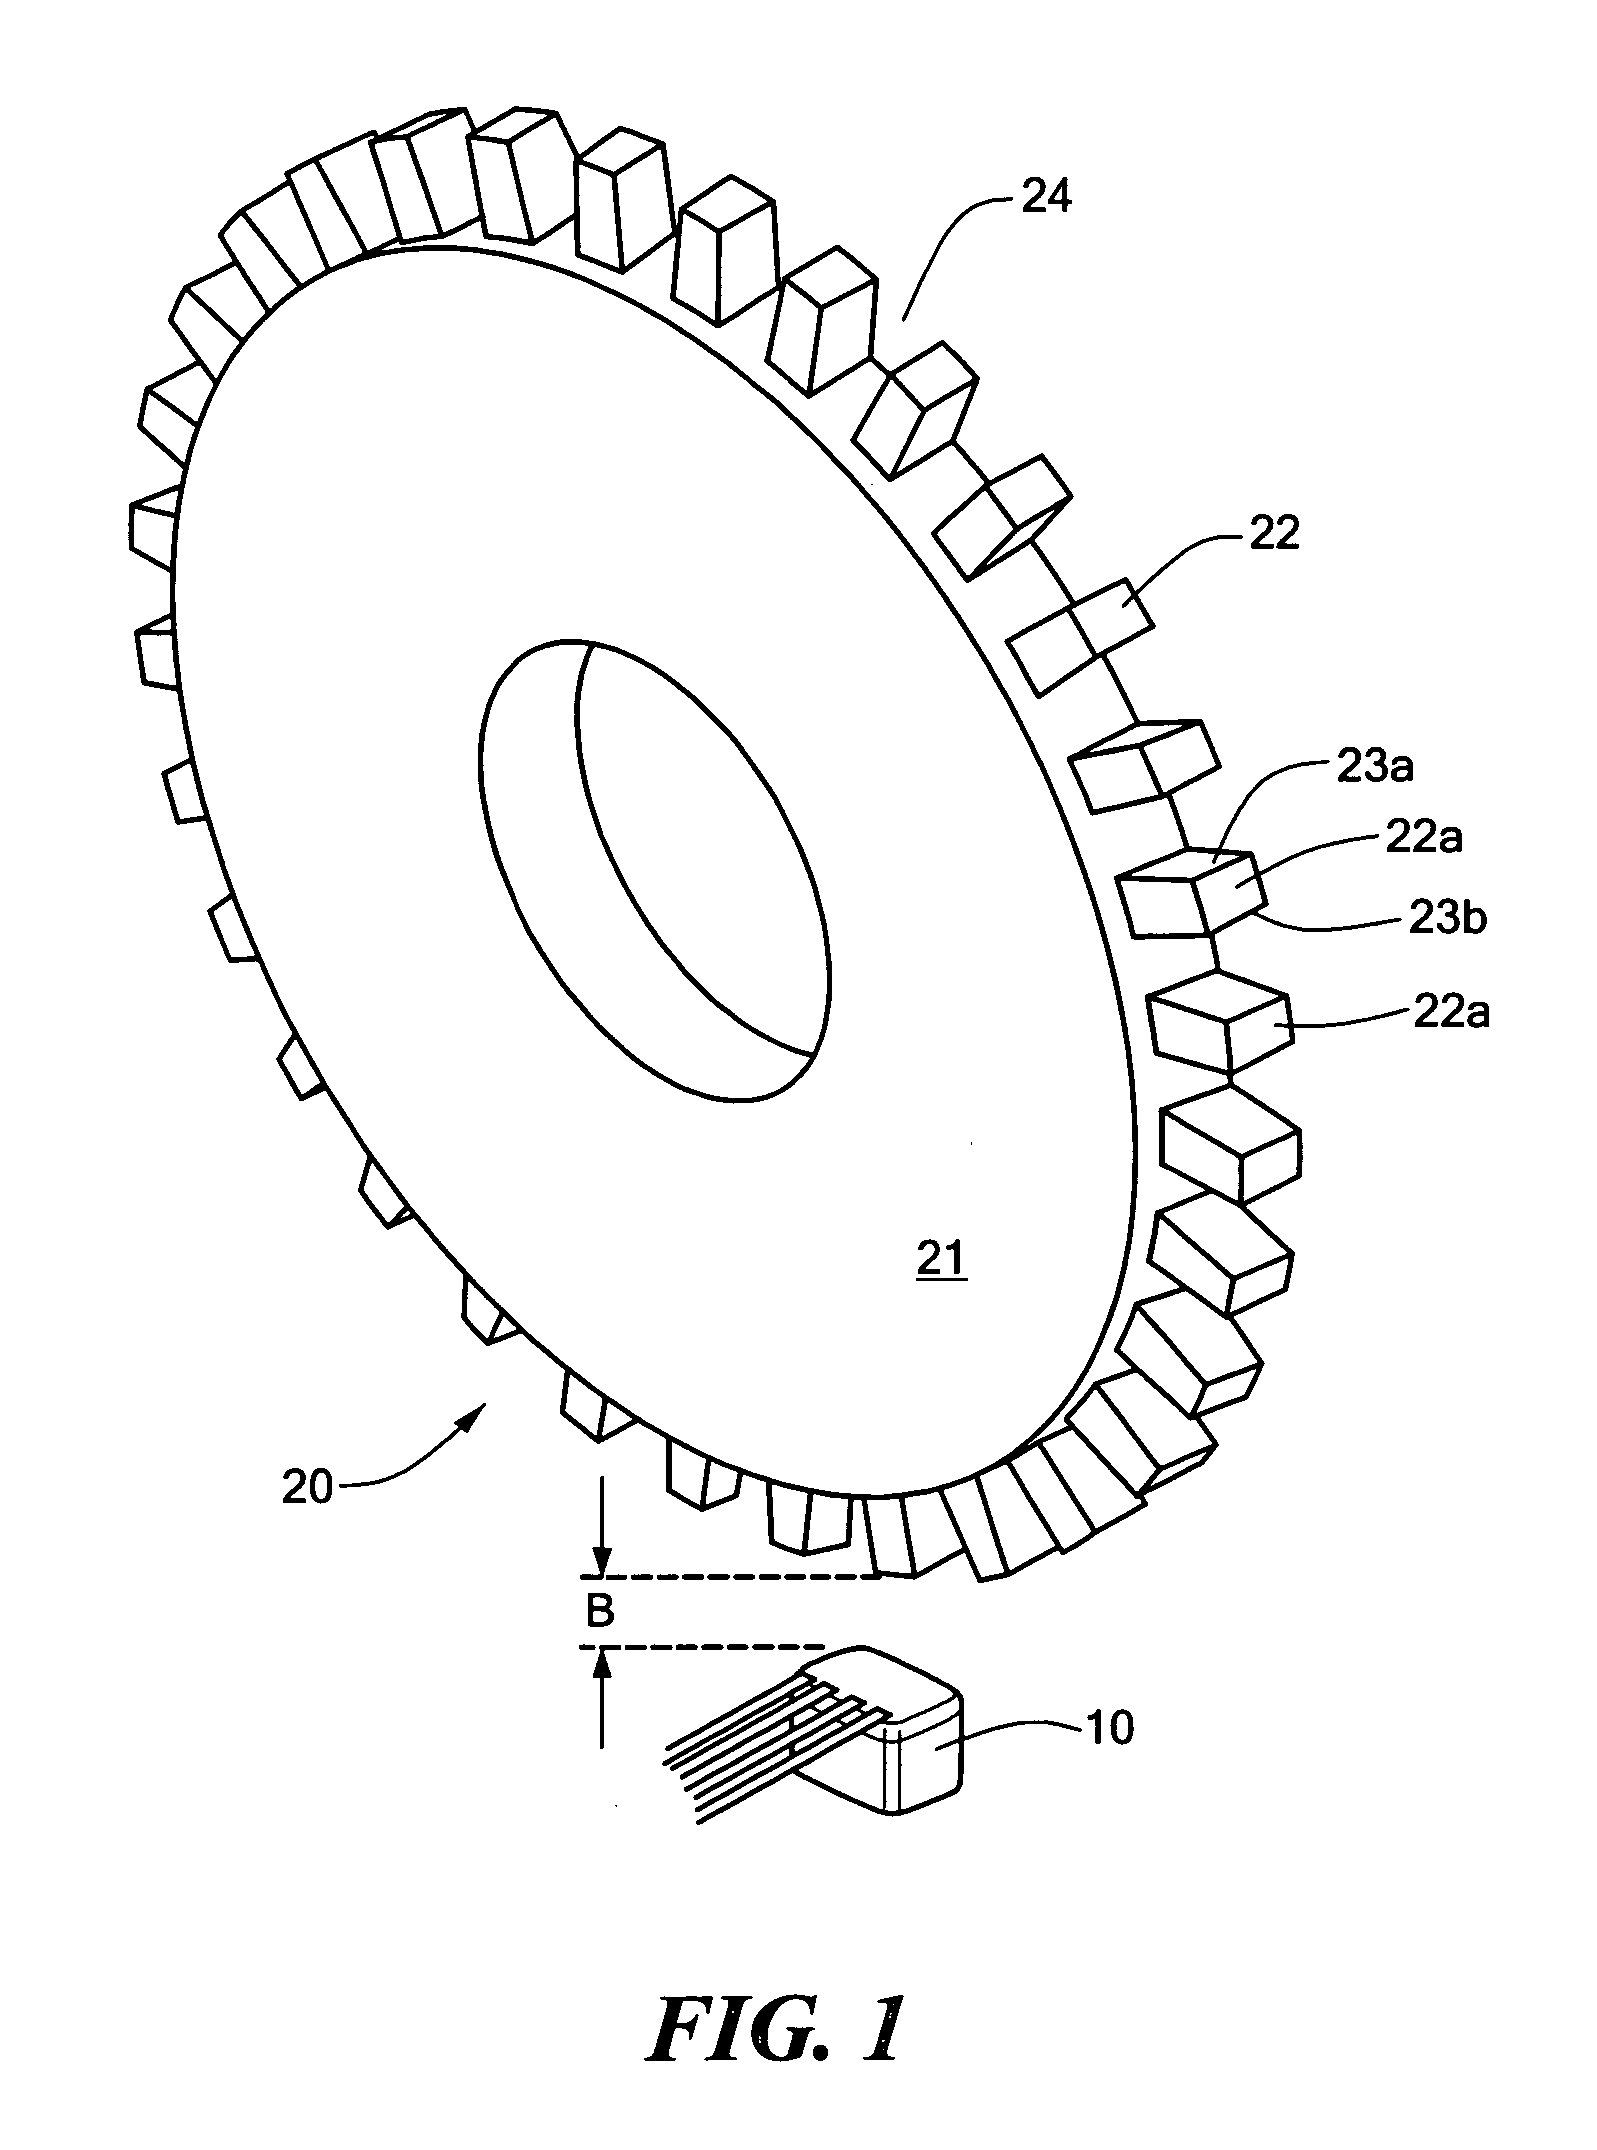 Method and apparatus for providing information from a speed and direction sensor